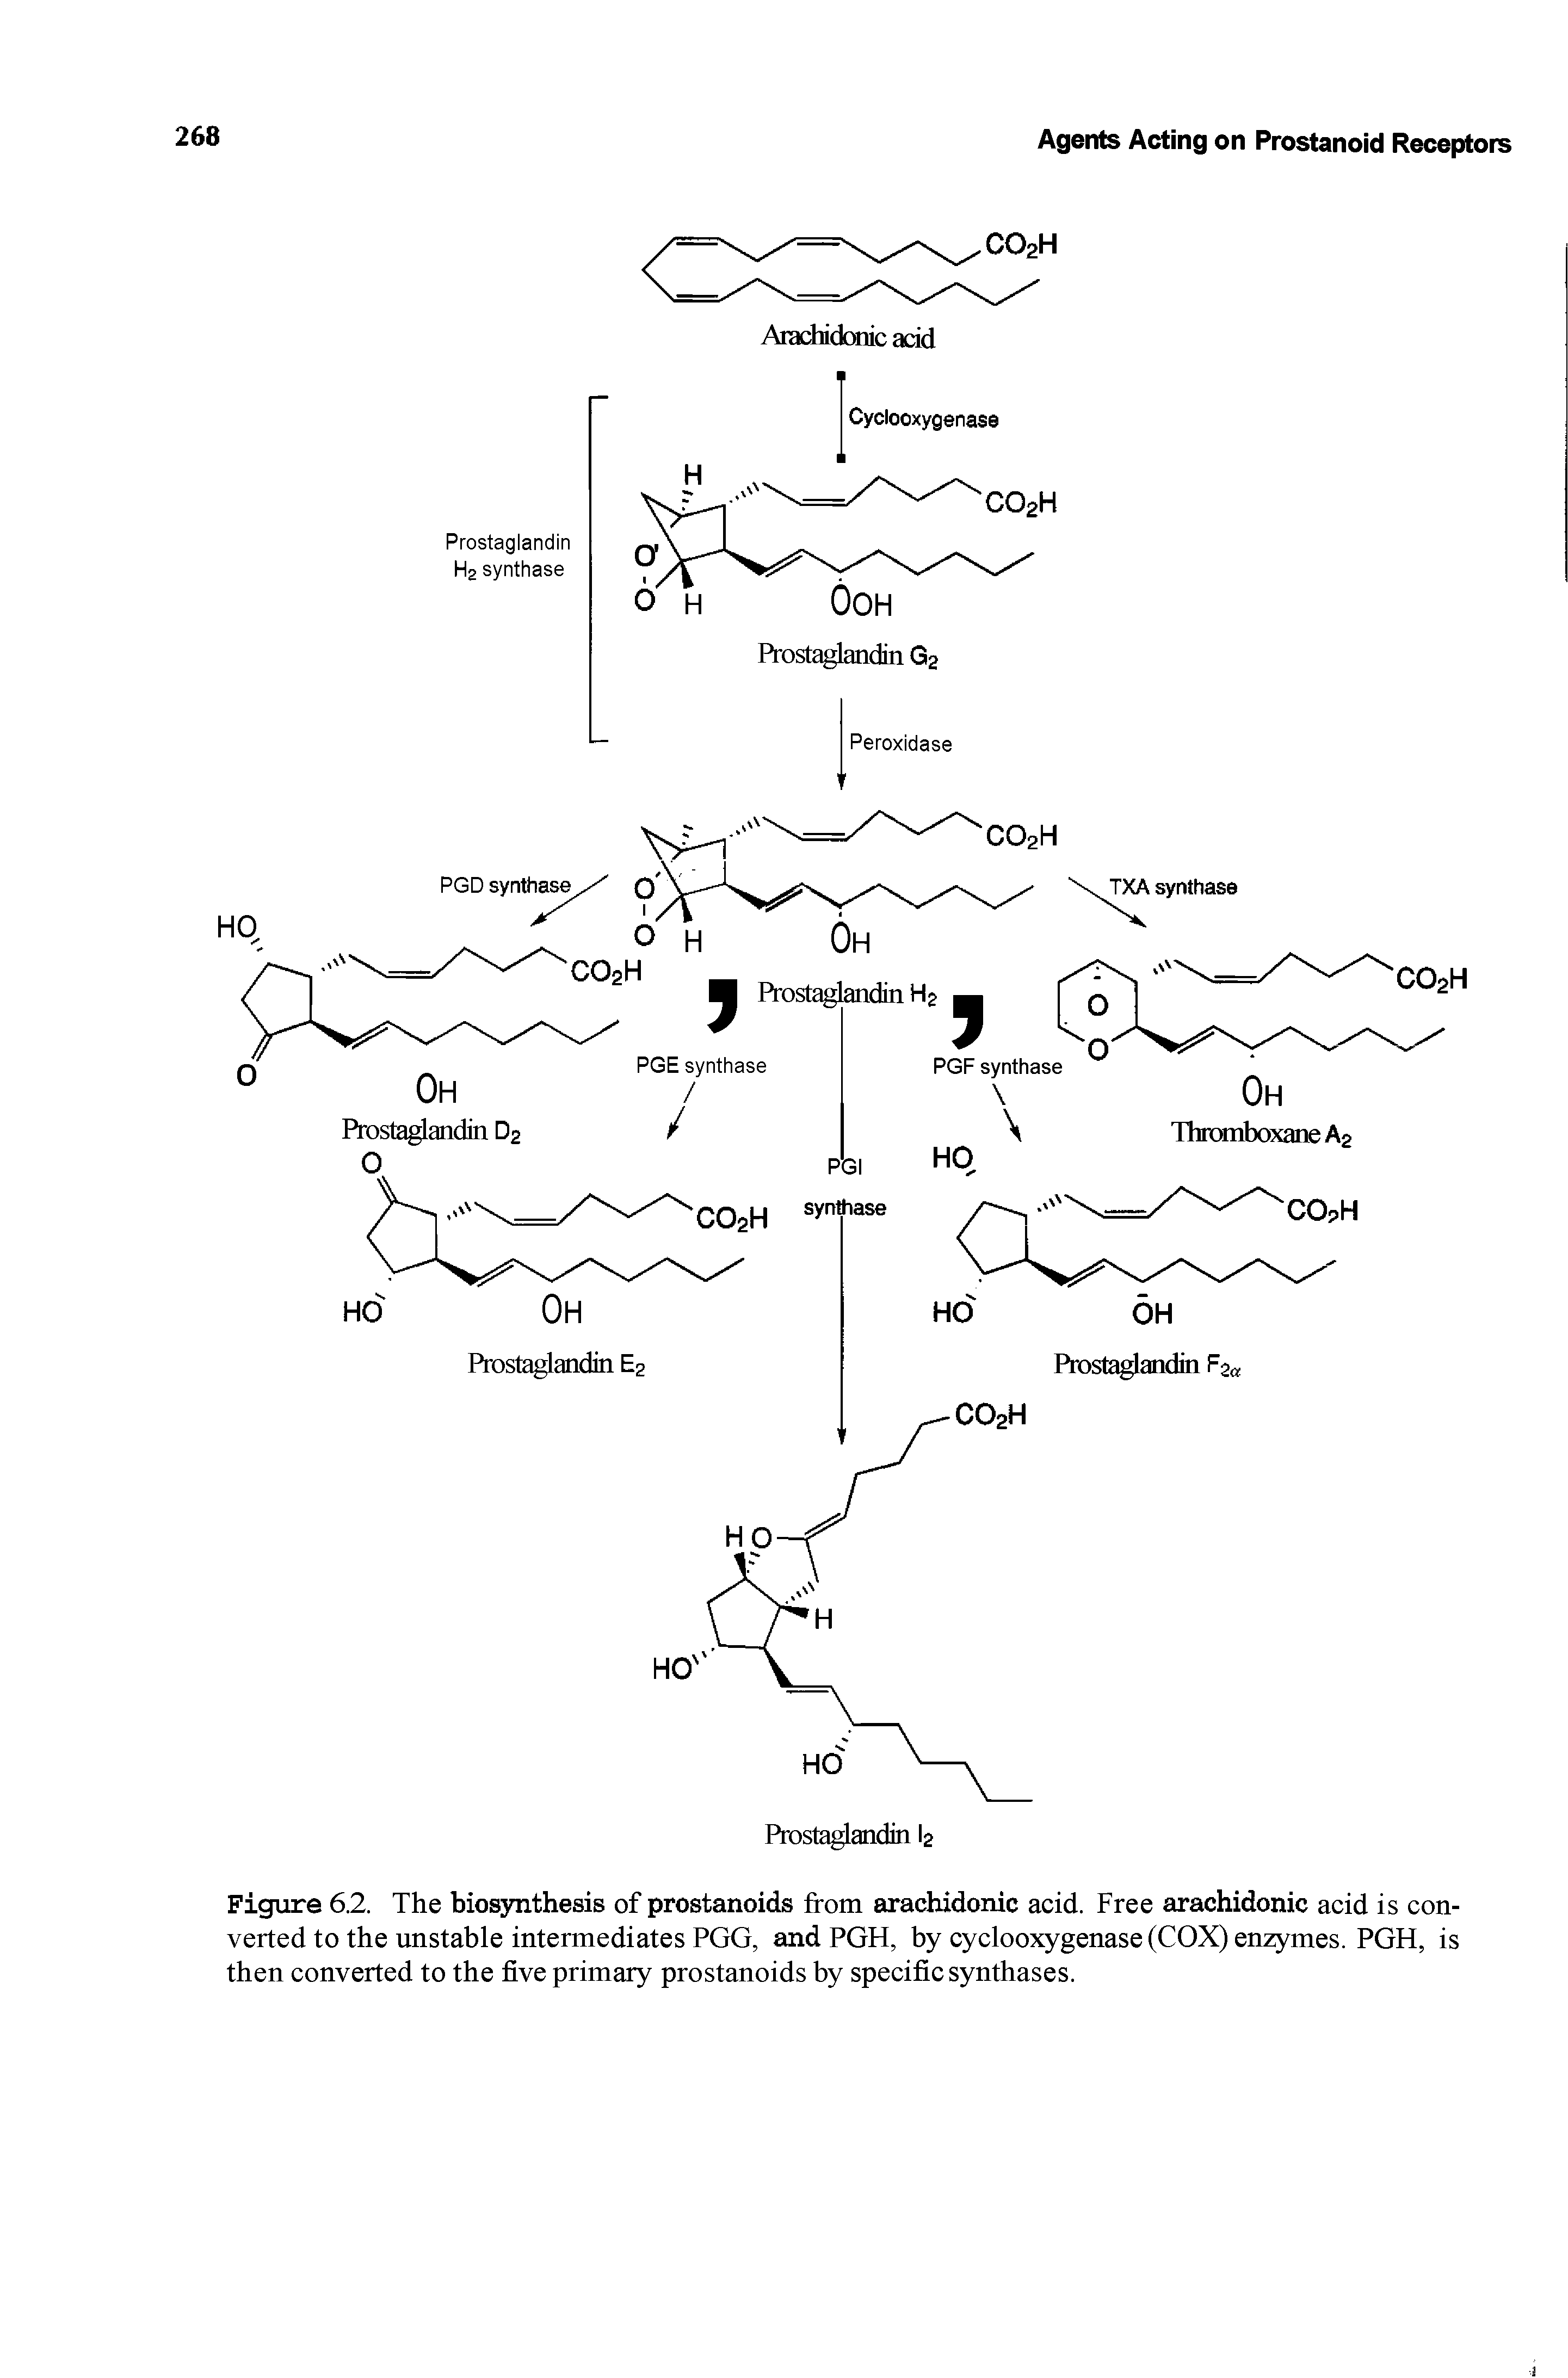 Figure 6.2. The biosynthesis of prostanoids from arachidonic acid. Free arachidonic acid is converted to the unstable intermediates PGG, and PGH, by cyclooxygenase (COX) enzymes. PGH, is then converted to the five primary prostanoids by specific synthases.